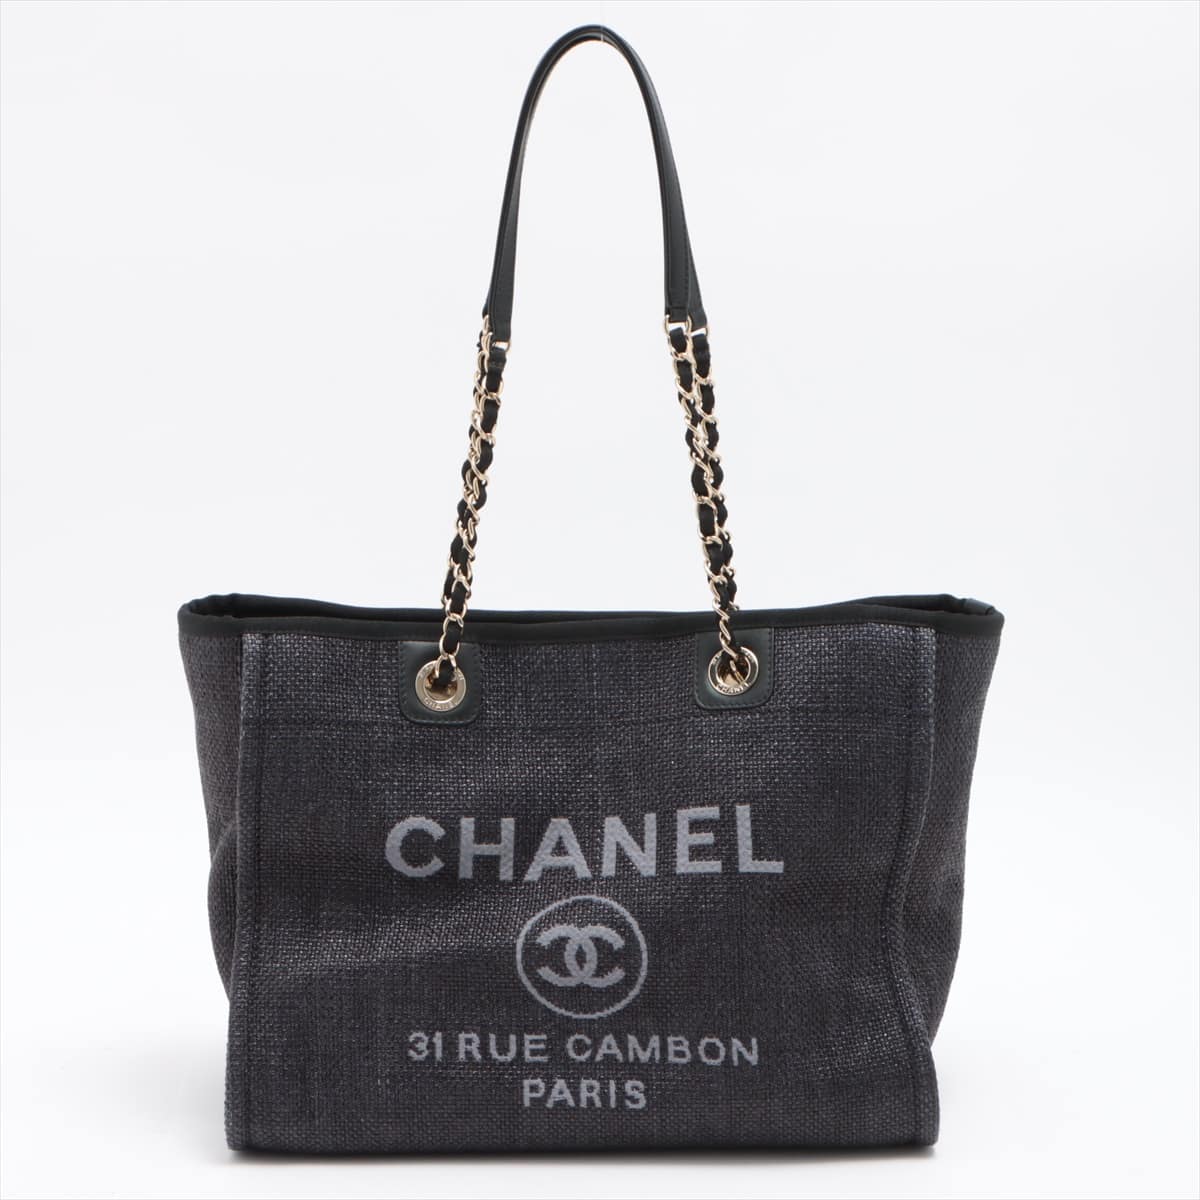 Chanel Deauville Straw Chain tote bag Navy blue Gold Metal fittings 26XXXXXX